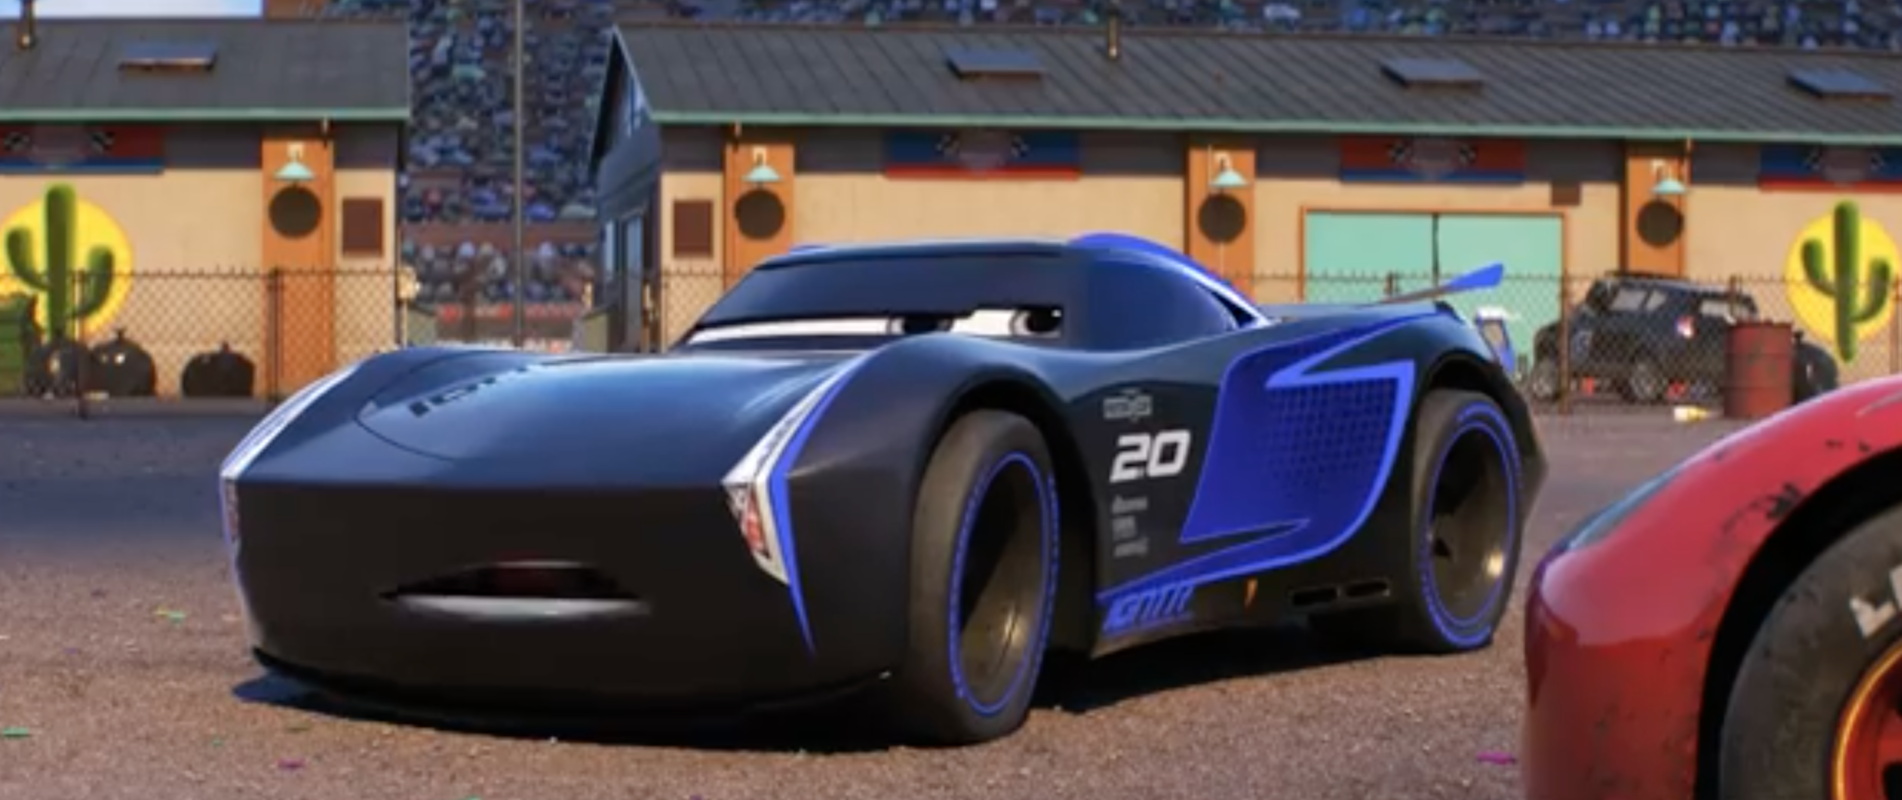 video final cars 3 trailer features new rival jackson